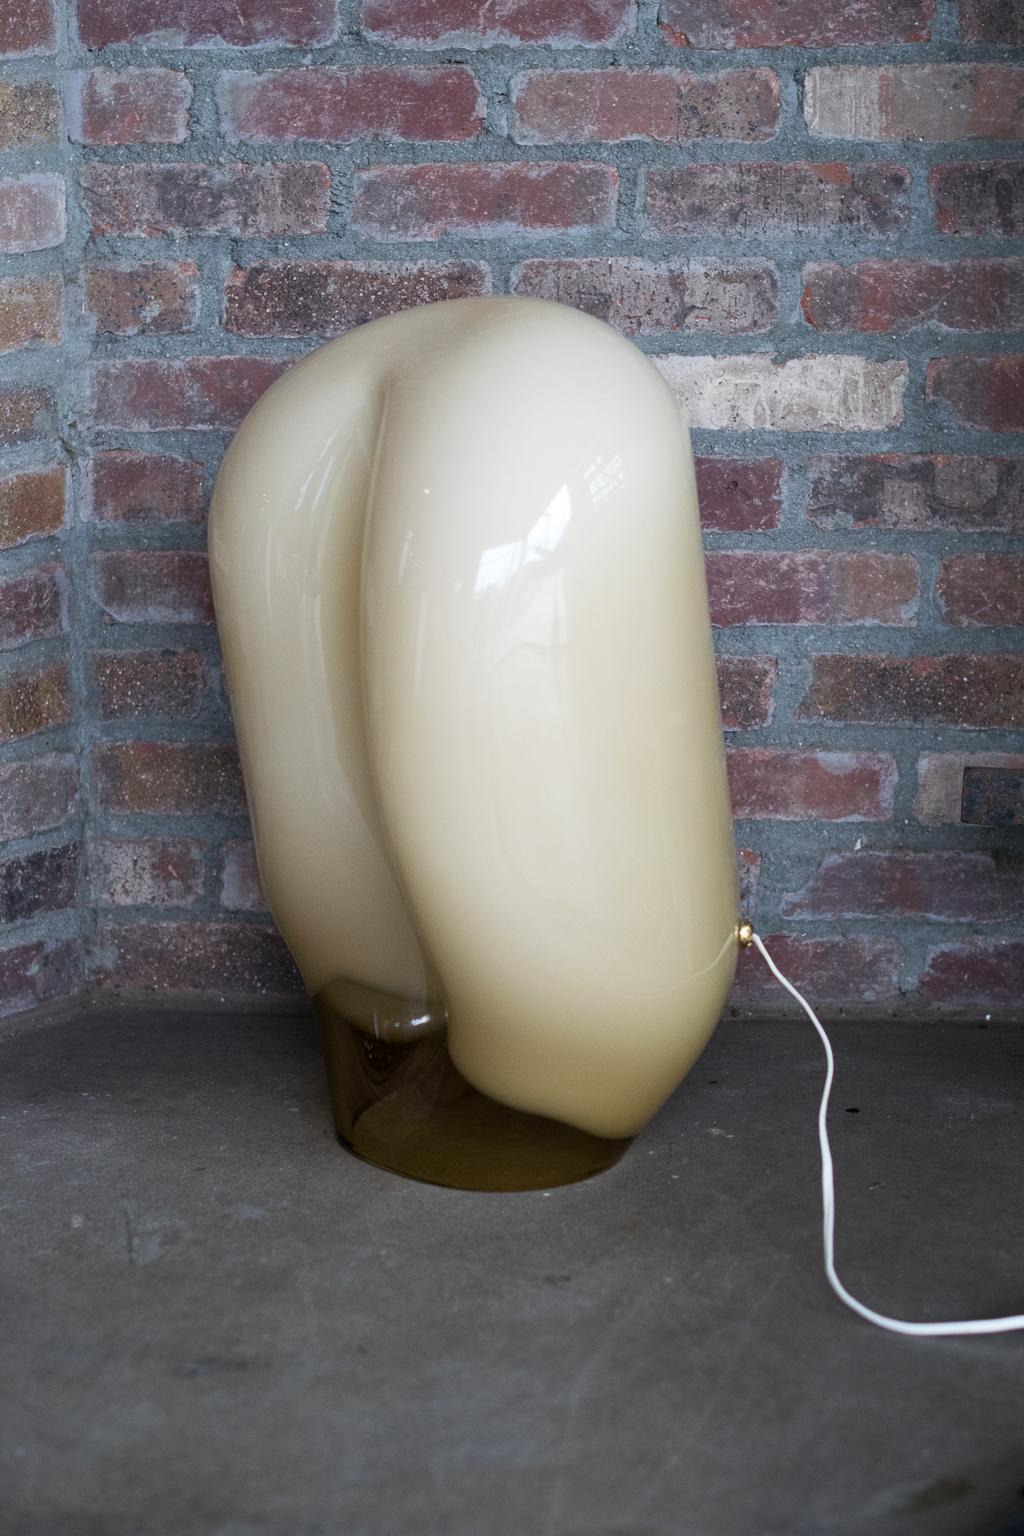 Sculptural Murano glass table lamp, designed by Gino Vistosi. Amorphic in form, color fades from opaque buff or beige to clear amber glass. Emits a warm white light when lit. Late Mid-Century Modern to modern styling. One large and one small